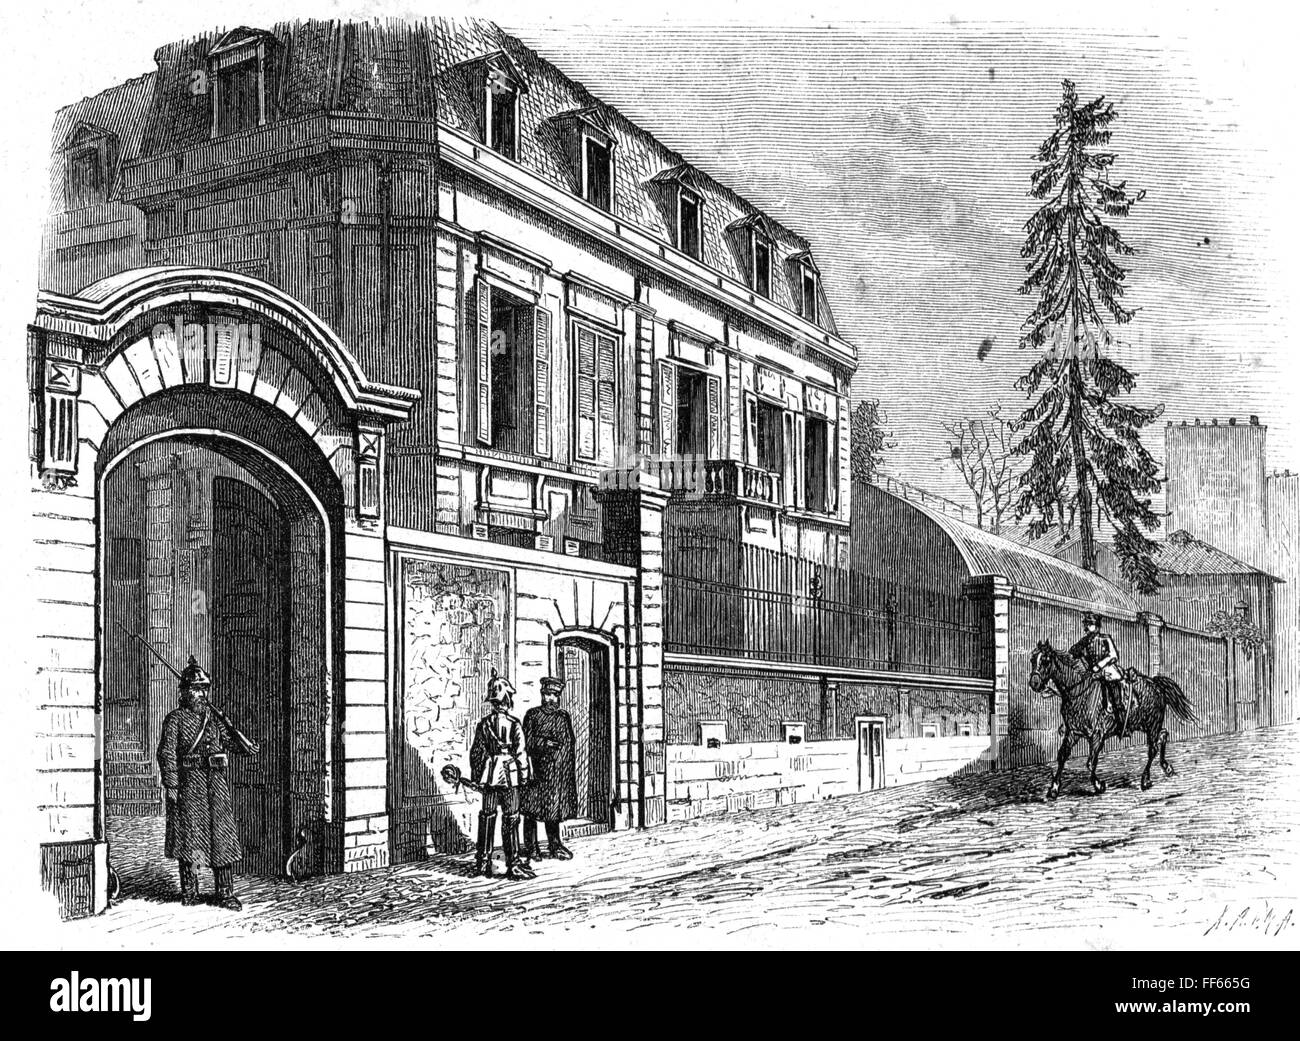 Franco-Prussian War 1870 - 1871, communications zone, quarters of Otto von Bismarck in Versailles, exterior view, wood engraving, 1878, France, Franco Prussian war, house, houses, guard, guard sentry, sentries, Germany, Prussia, wall, walls, communications zone, back area, rear echelon, quarter, quarters, 19th century, historic, historical, people, Additional-Rights-Clearences-Not Available Stock Photo